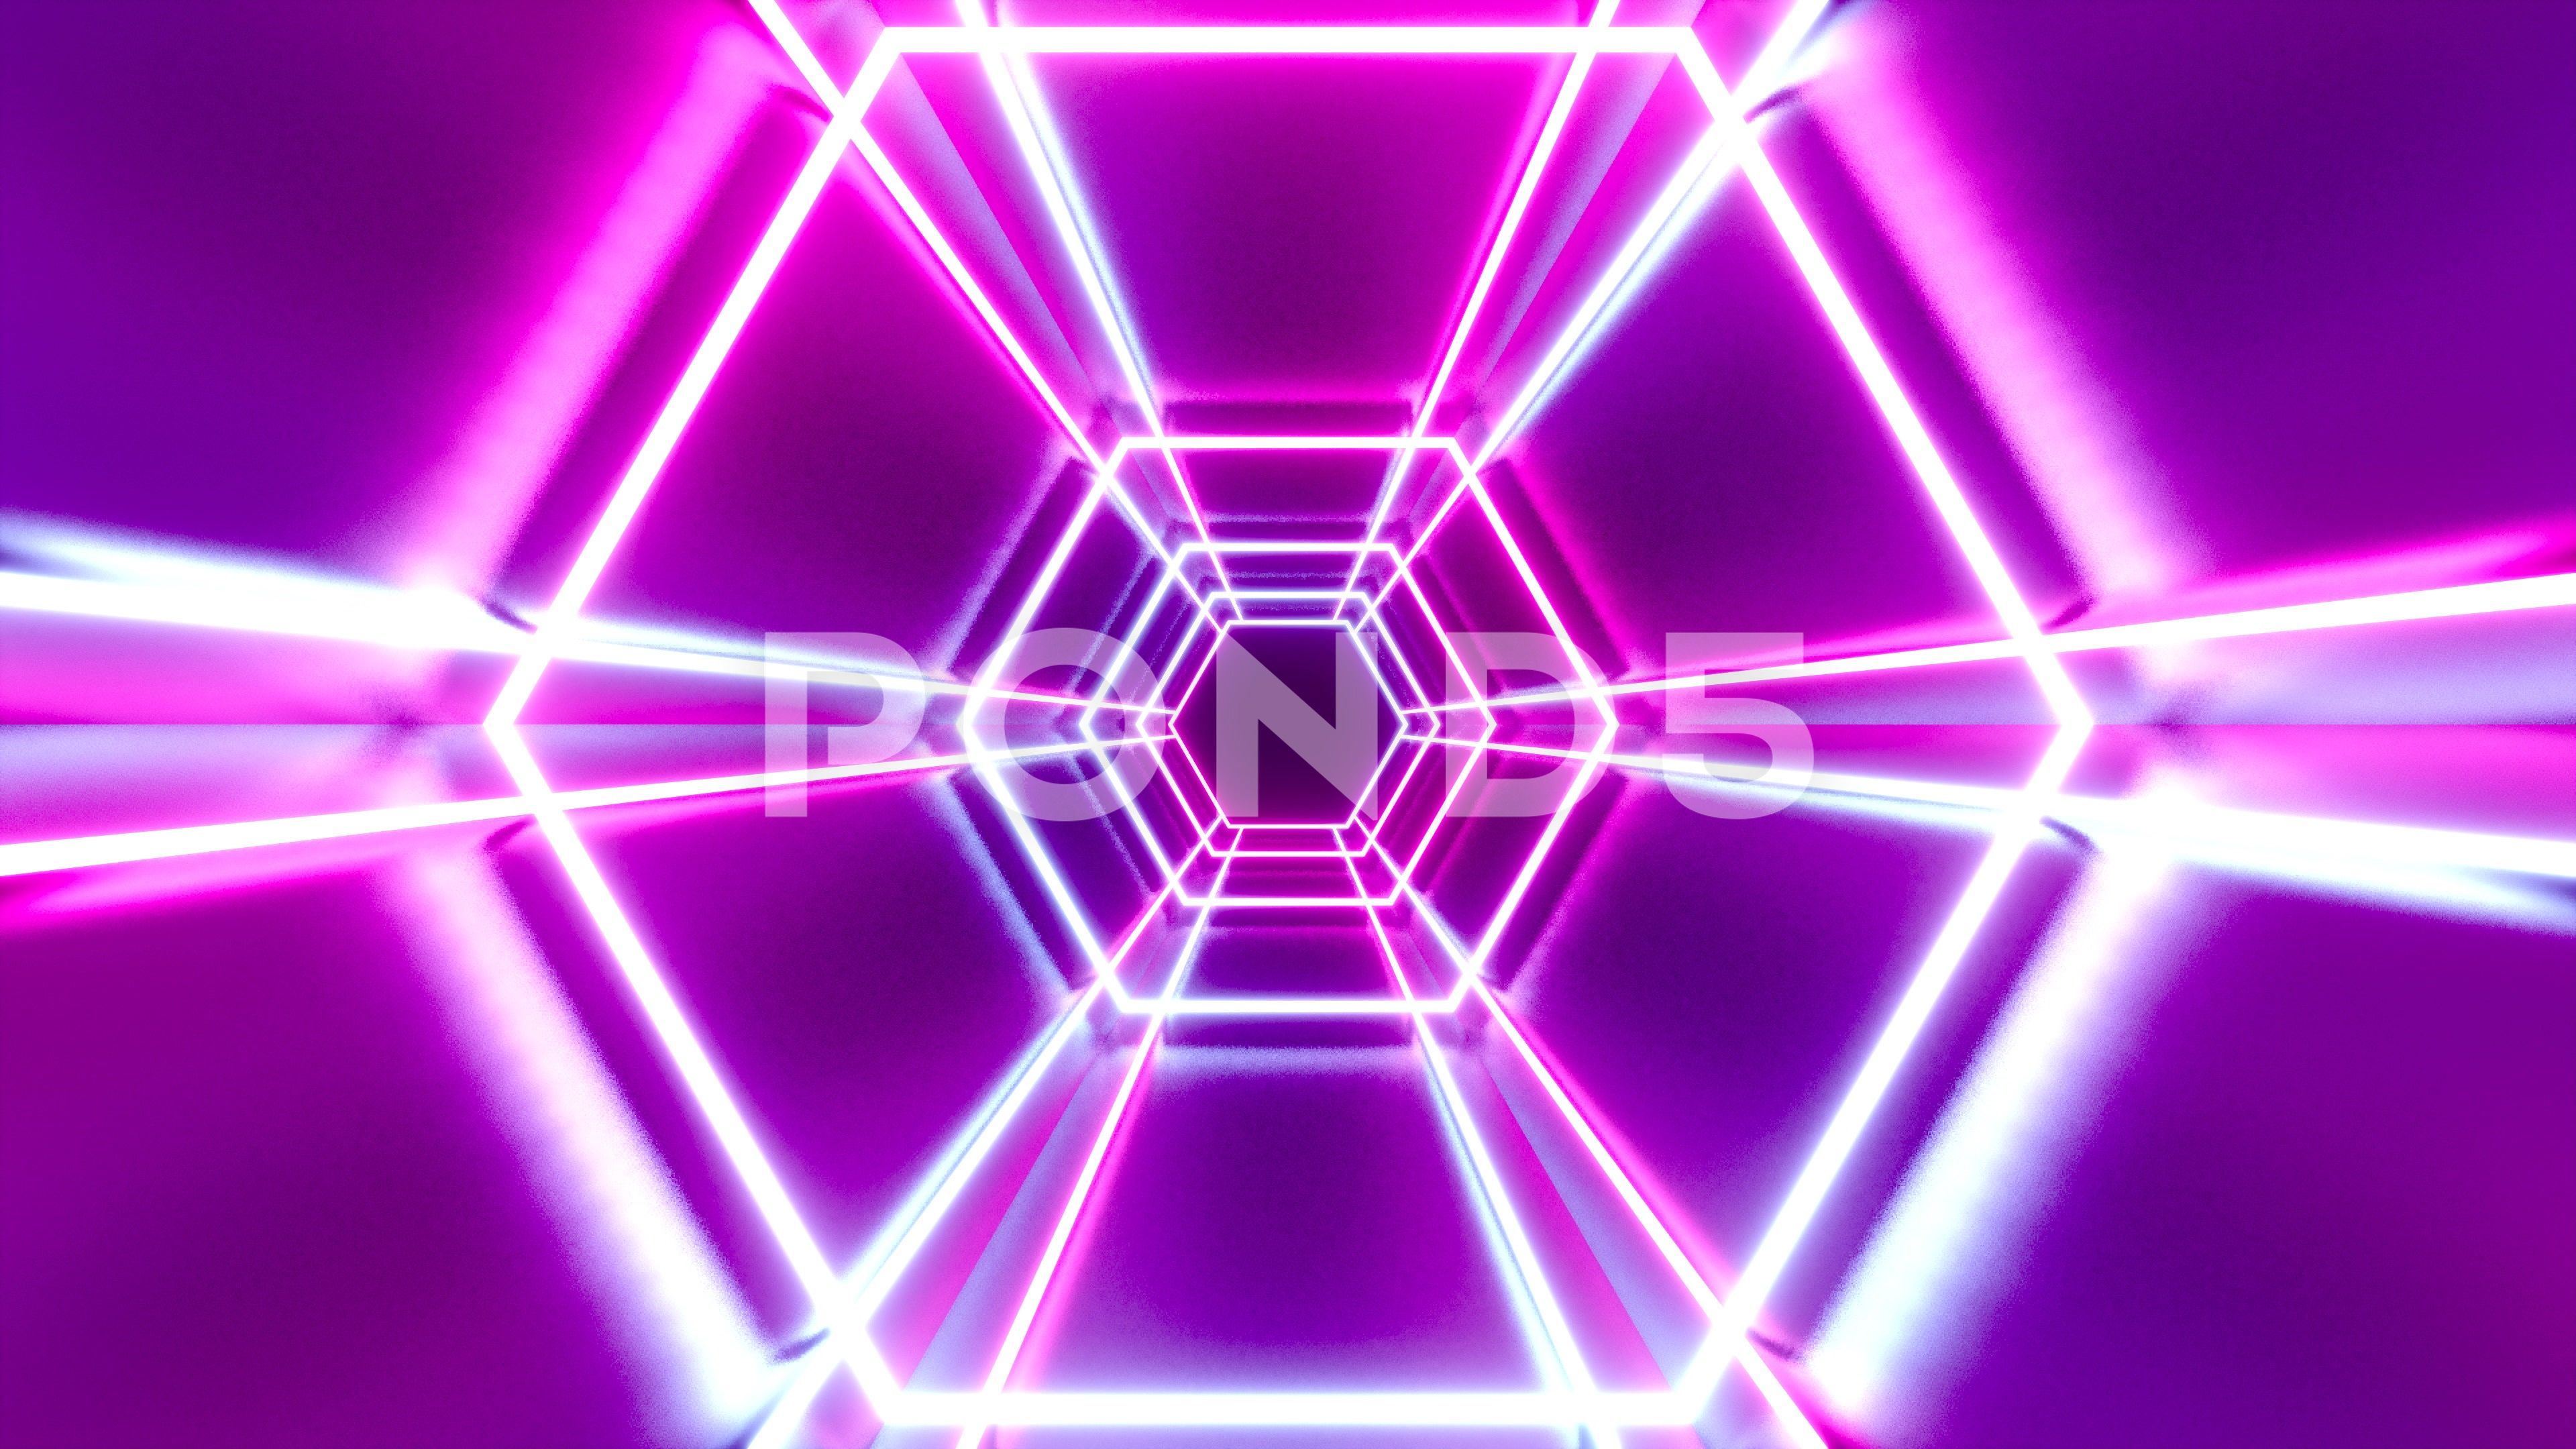 3D 4k abstract tunnel/ neon animation hexagons Stock Footage #AD , # neon#animation#abstract#tunnel. Neon, Wallpaper space, Abstract